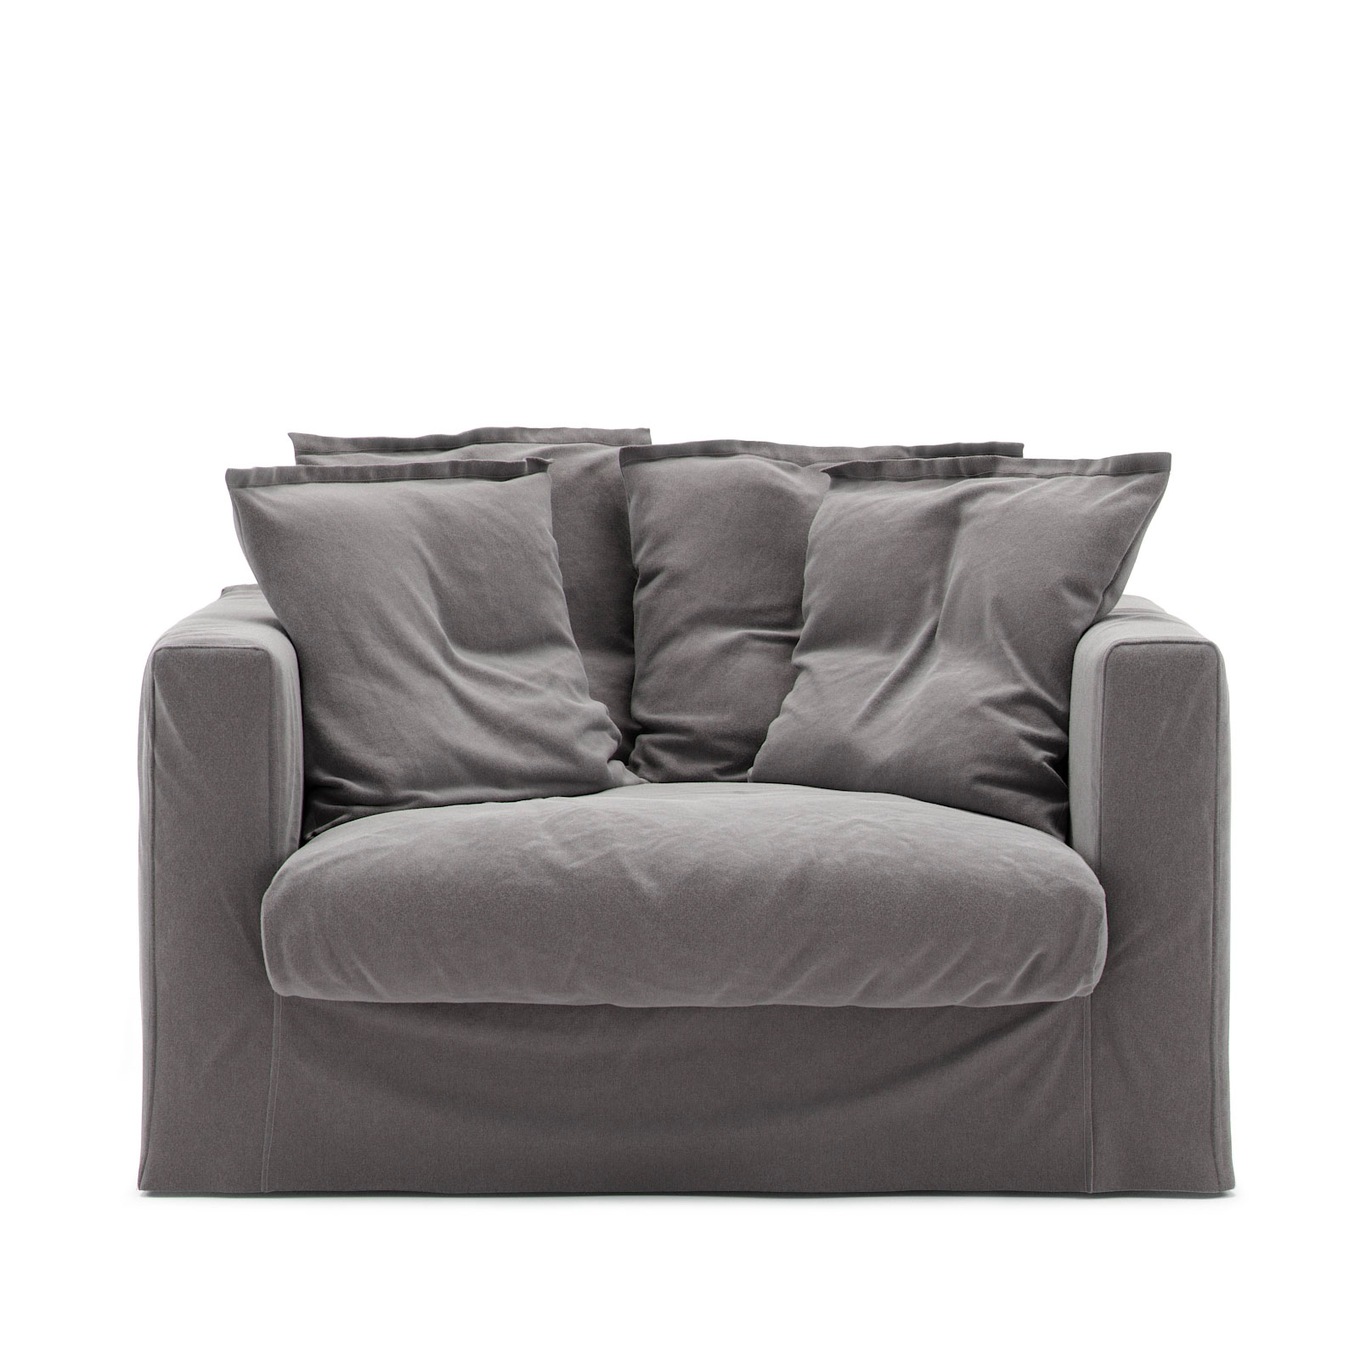 Le Grand Air Loveseat Upholstery Cotton, Grey